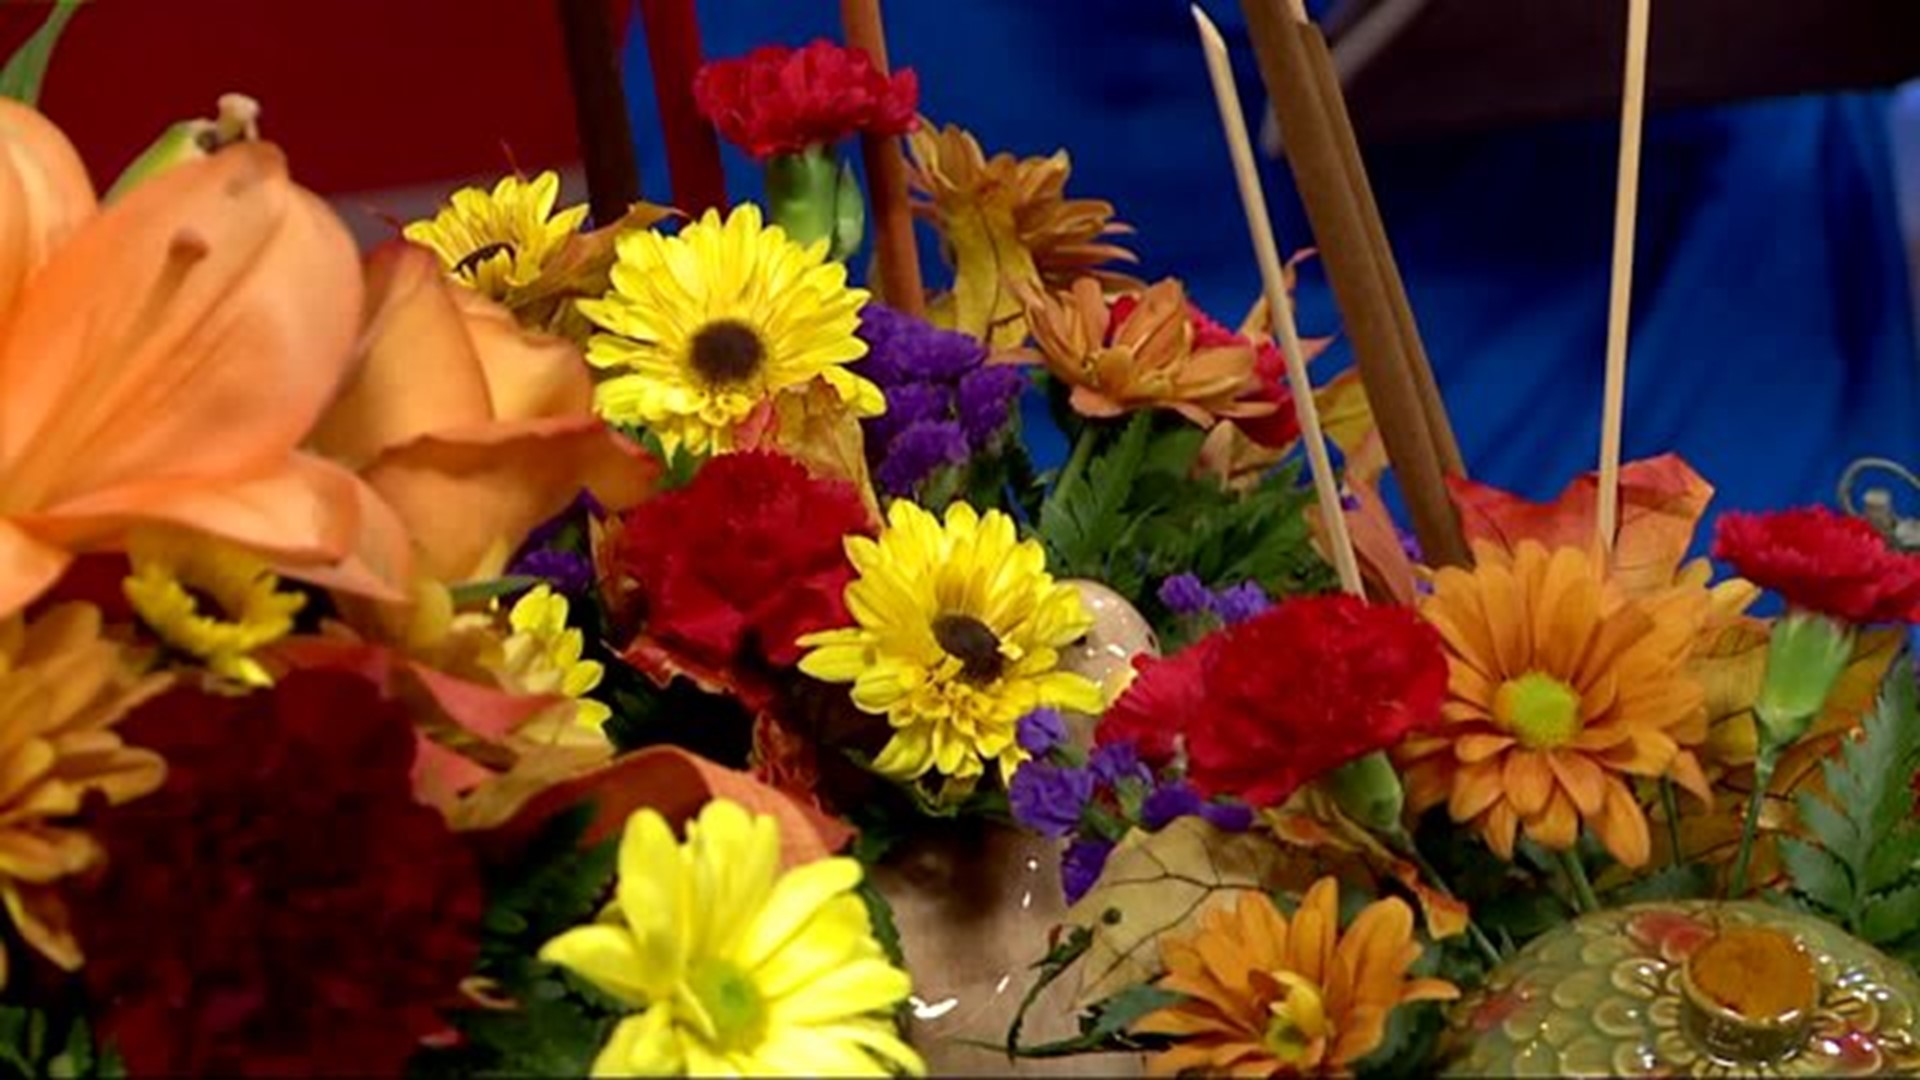 Royer`s Flowers puts together arrangements to bring your holiday table together